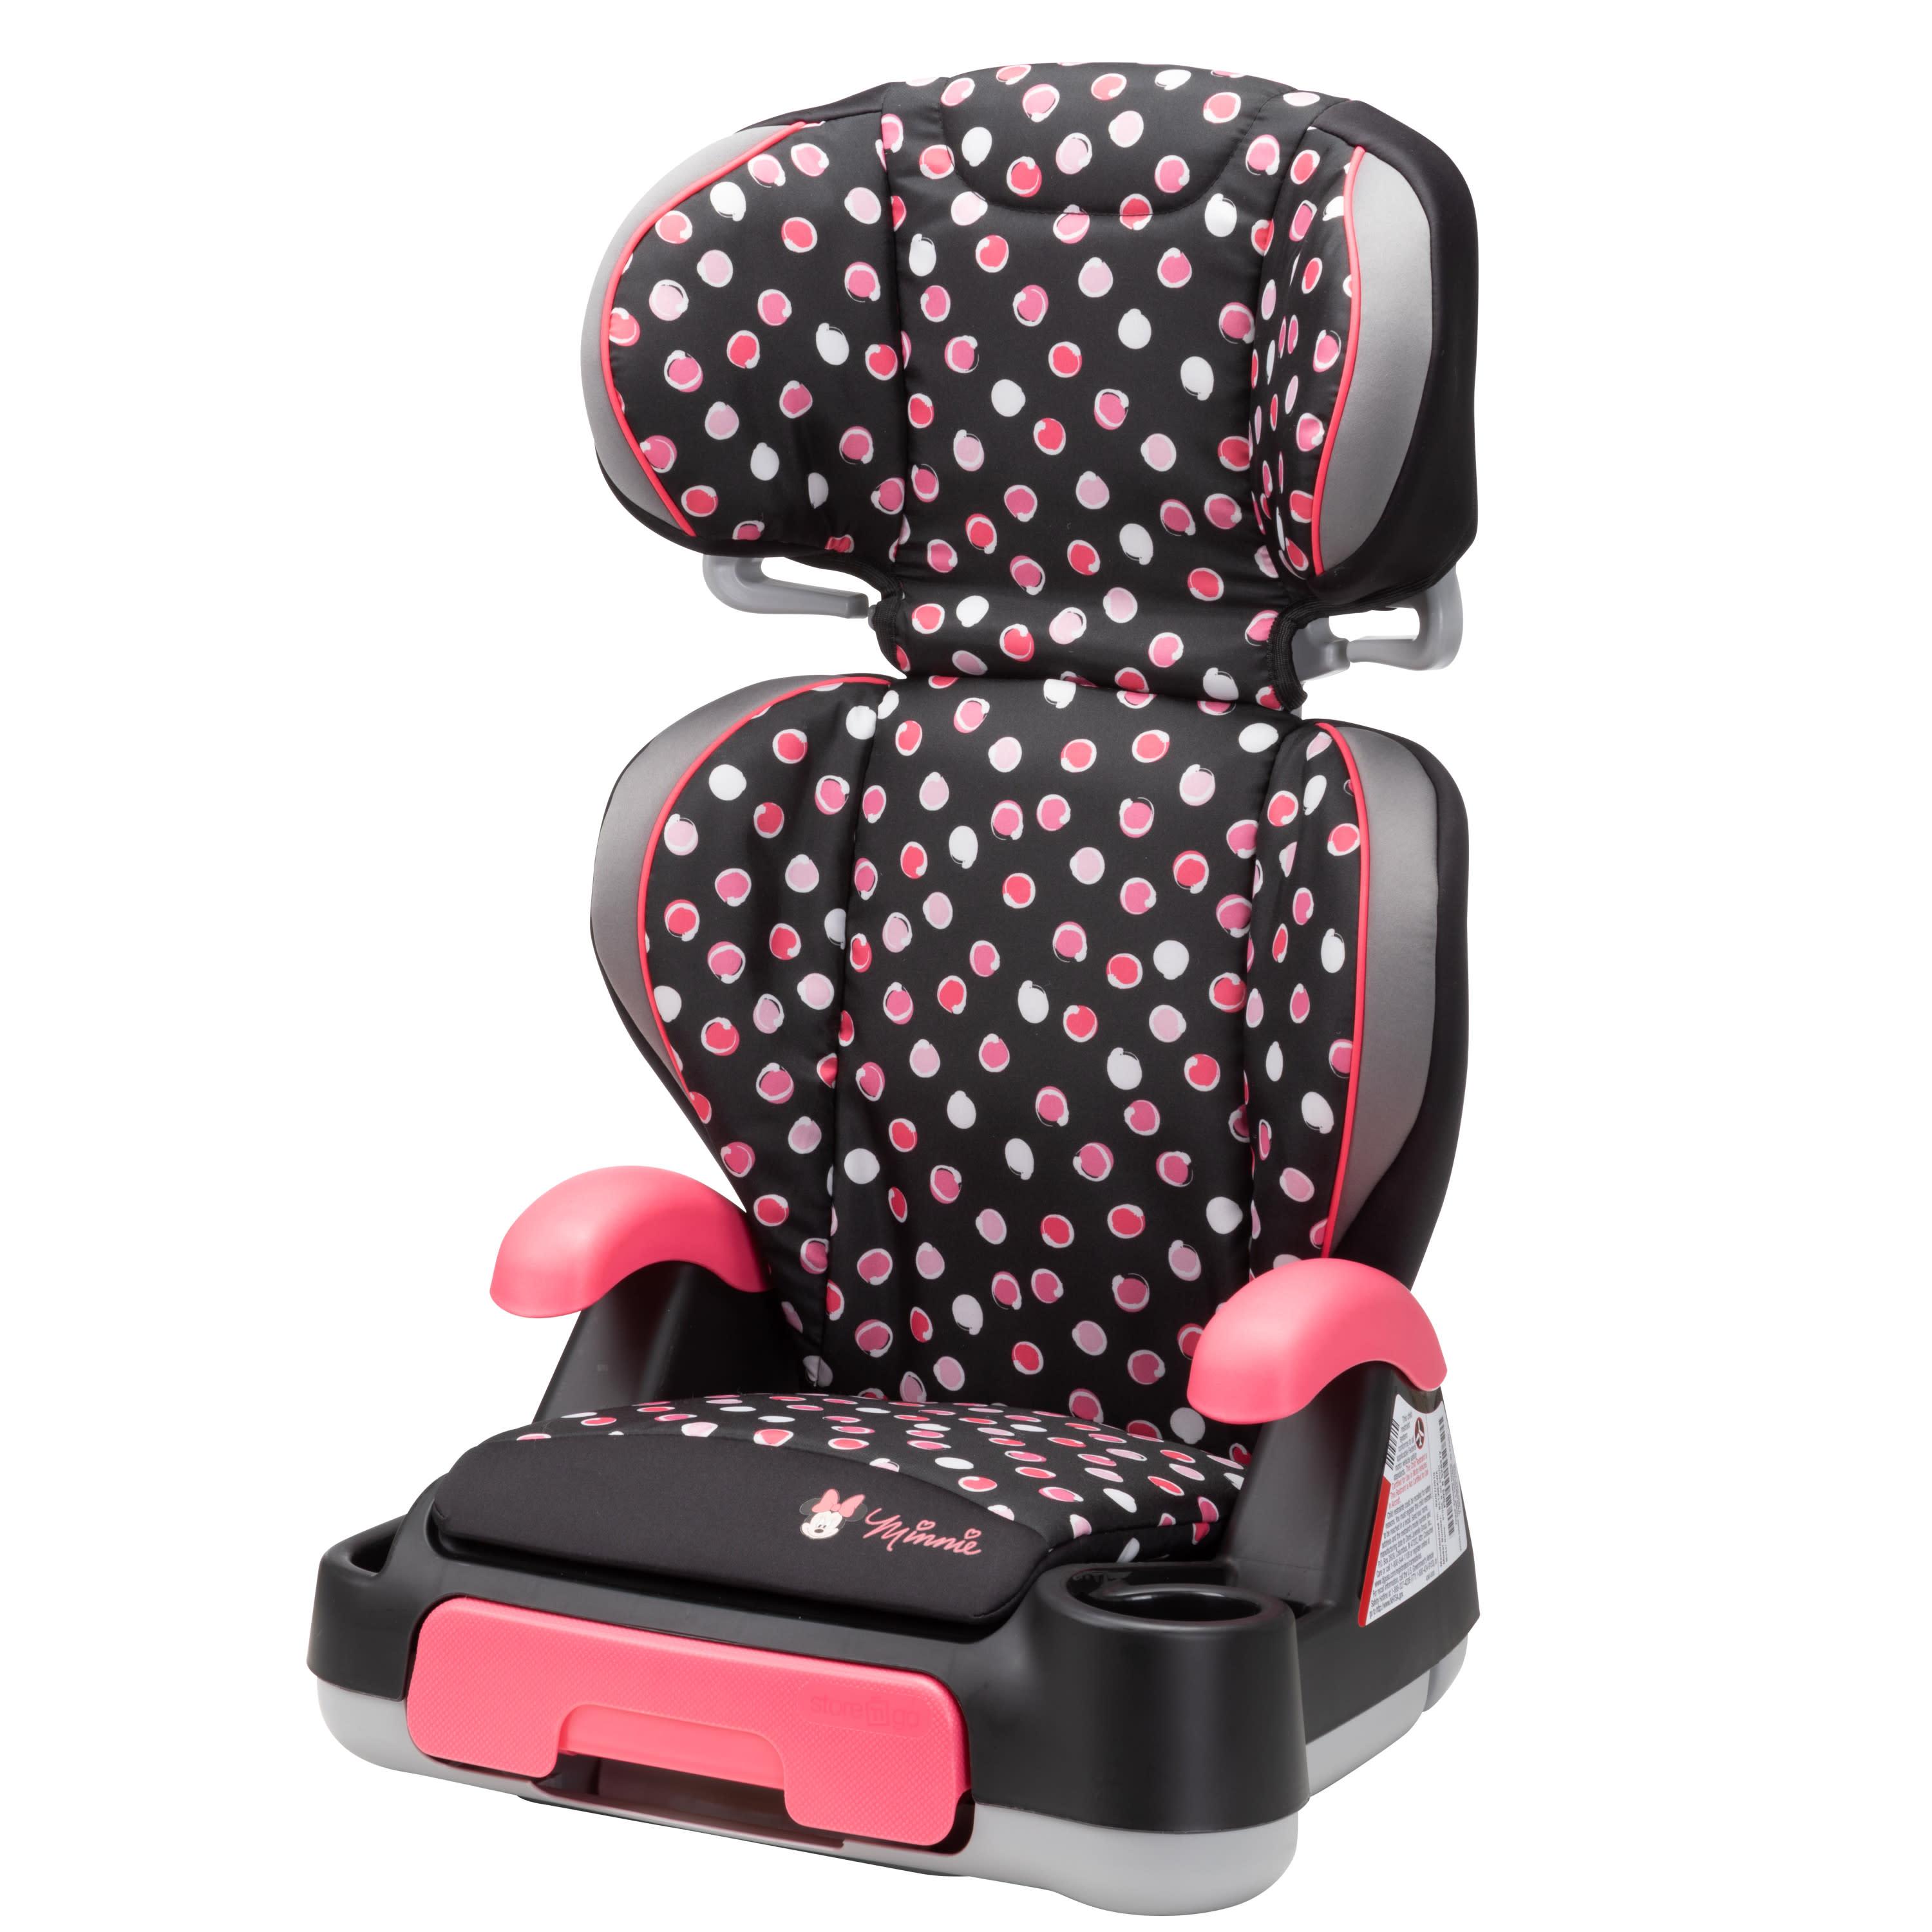 Disney Baby Store 'n Go Sport Booster Car Seat, Minnie Mash Up - image 18 of 21